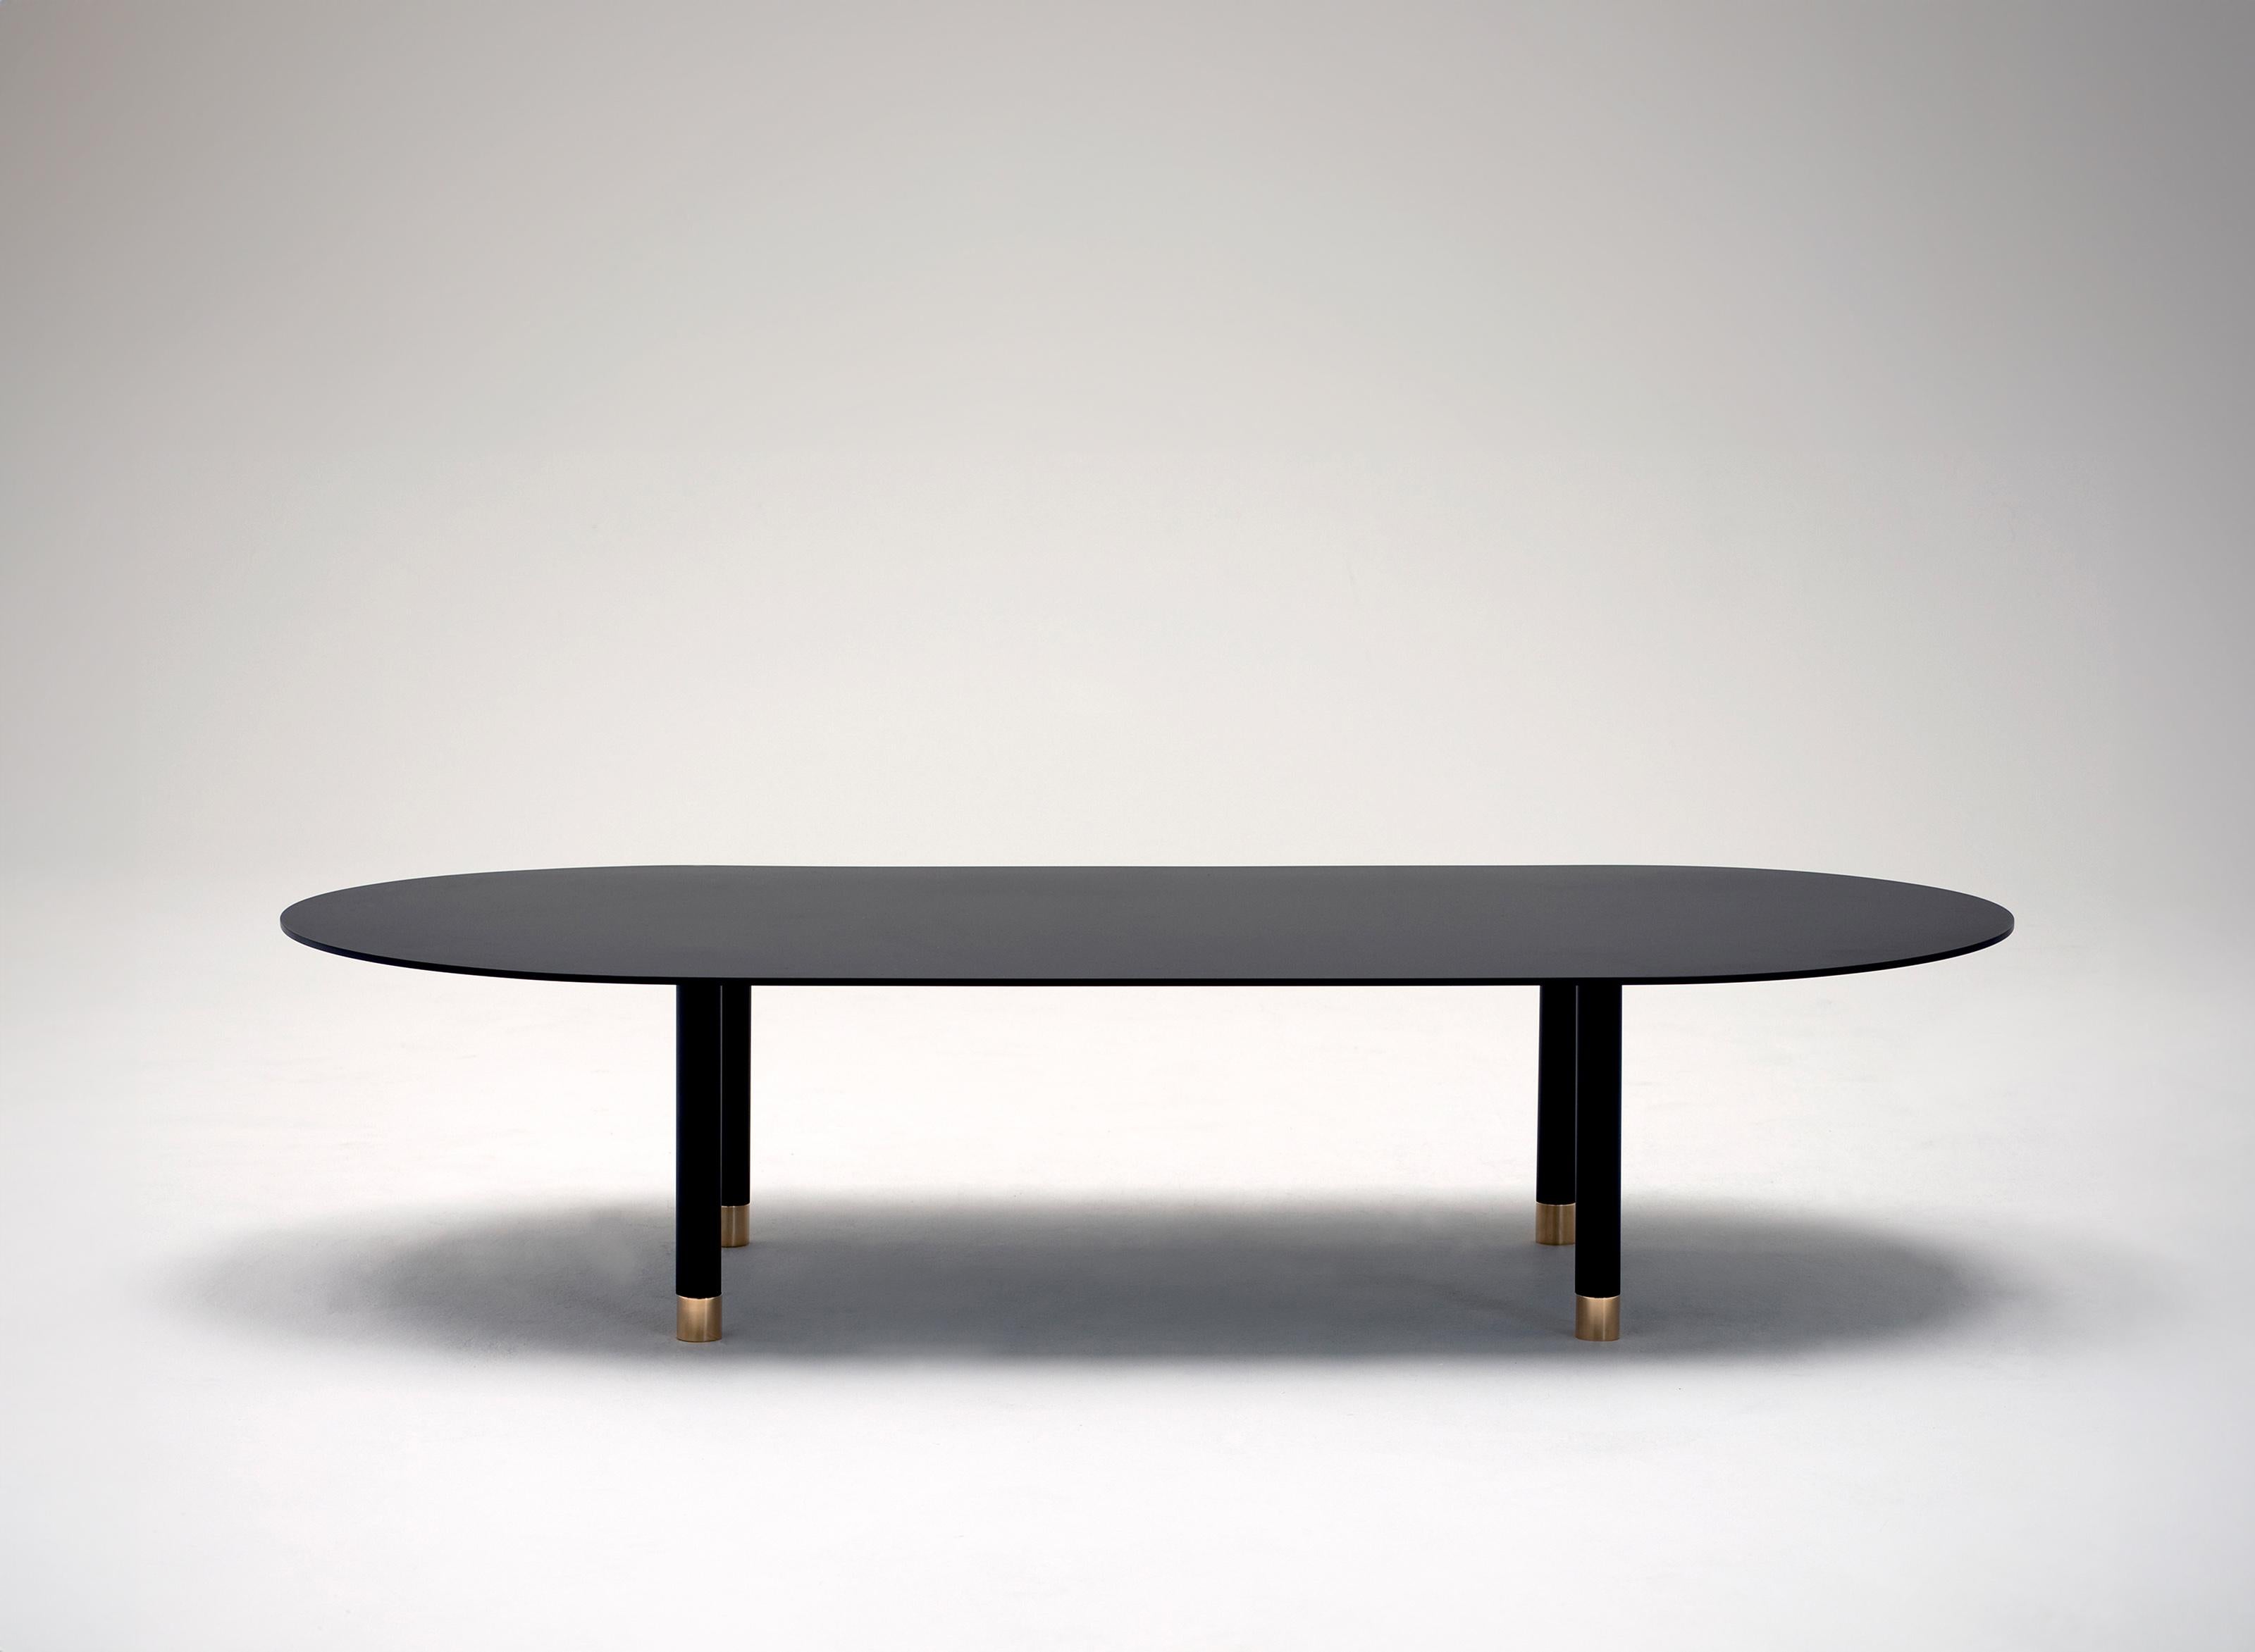 Pill Coffee Table by Phase Design
Dimensions: D 149.9 x W 71.1 x H 33 cm. 
Materials: Powder-coated steel and brass.

Powder-coated steel base with solid brass tips. Powder coat finishes are available in flat black, flat white, or flat gray. Prices